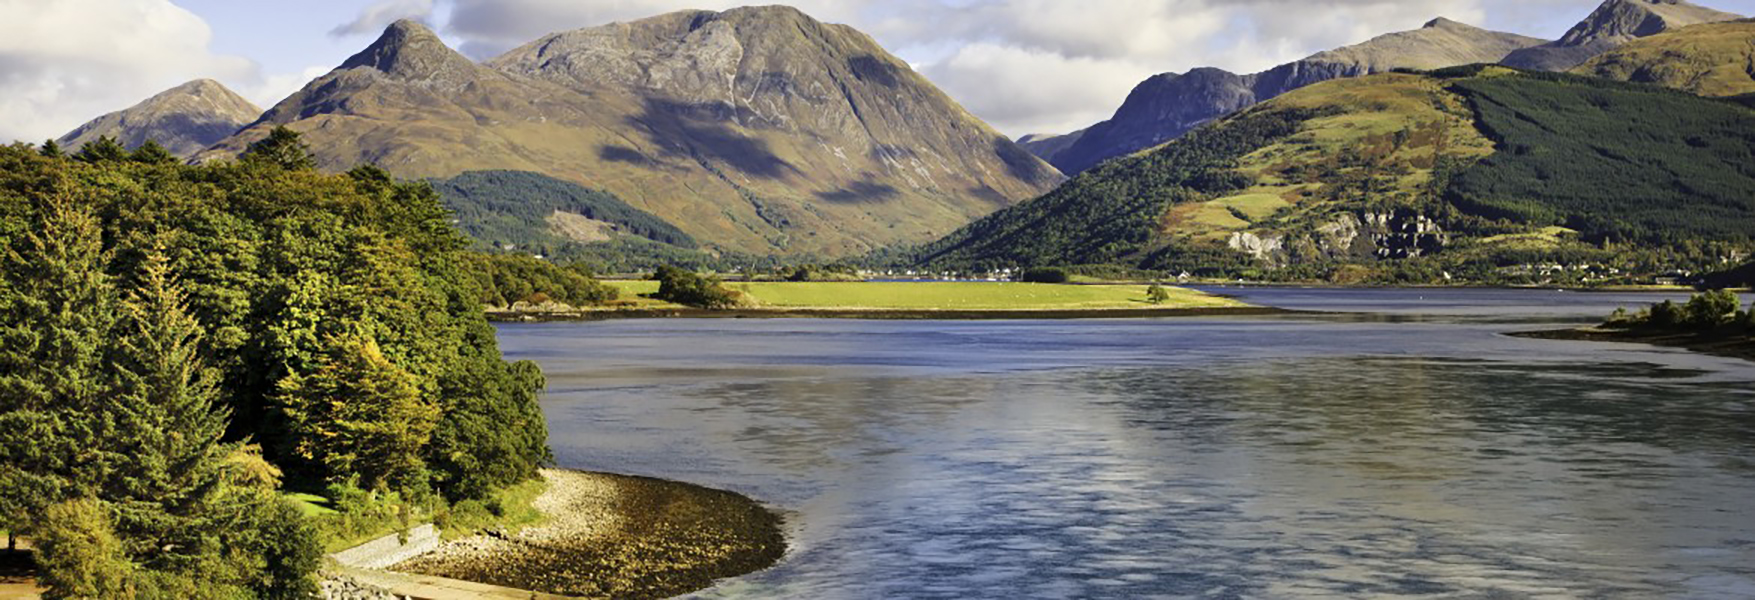 scotland countryside with mountains and large body of water